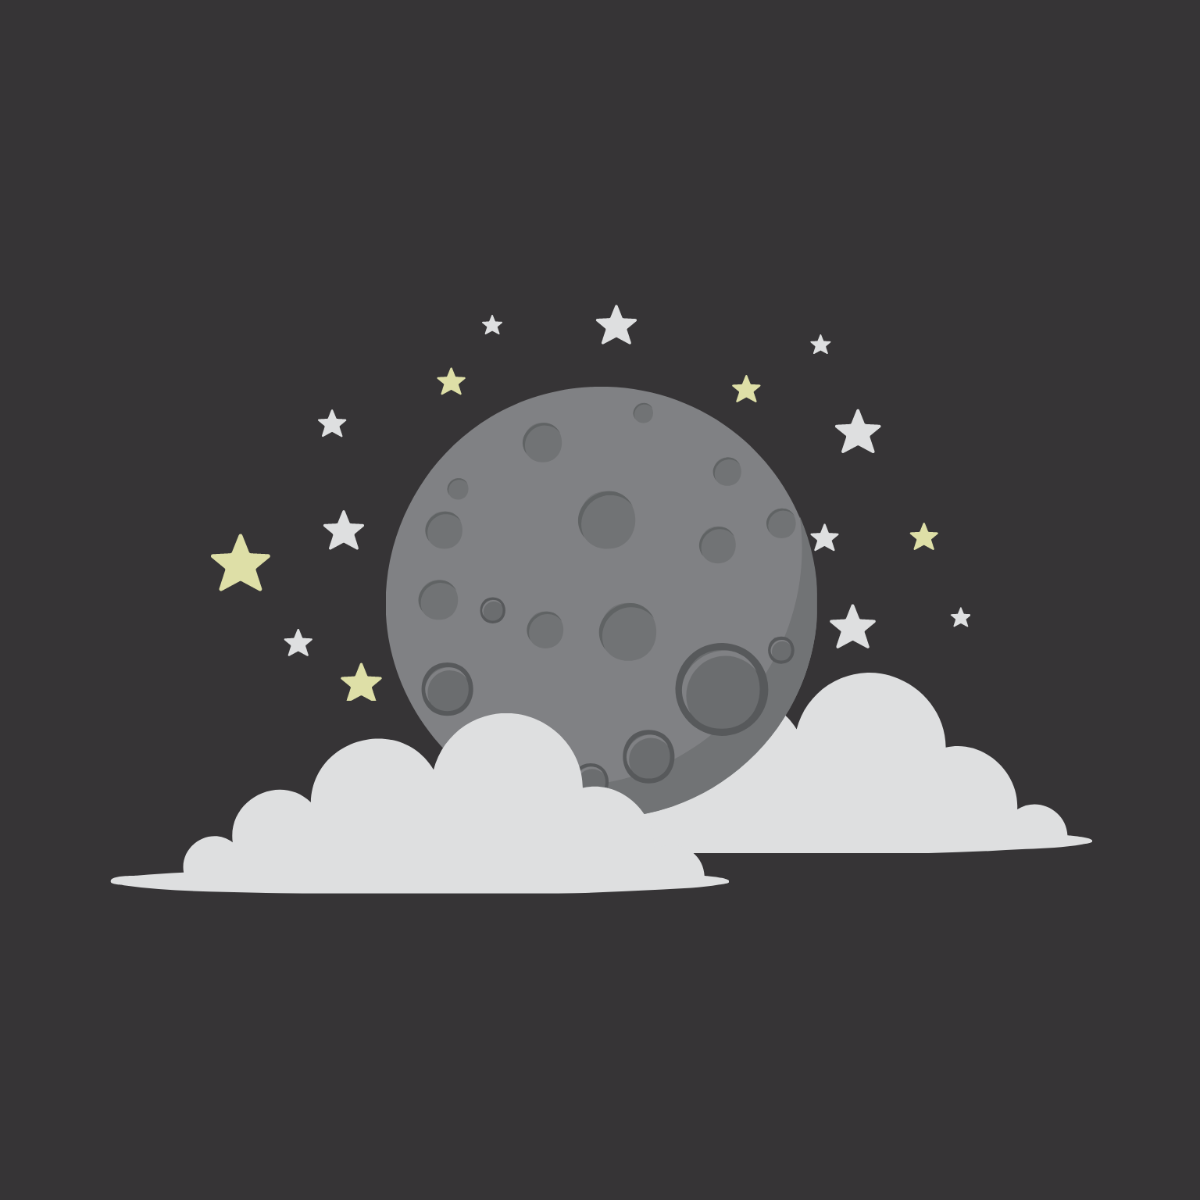 Free Moon and Stars Vector Template